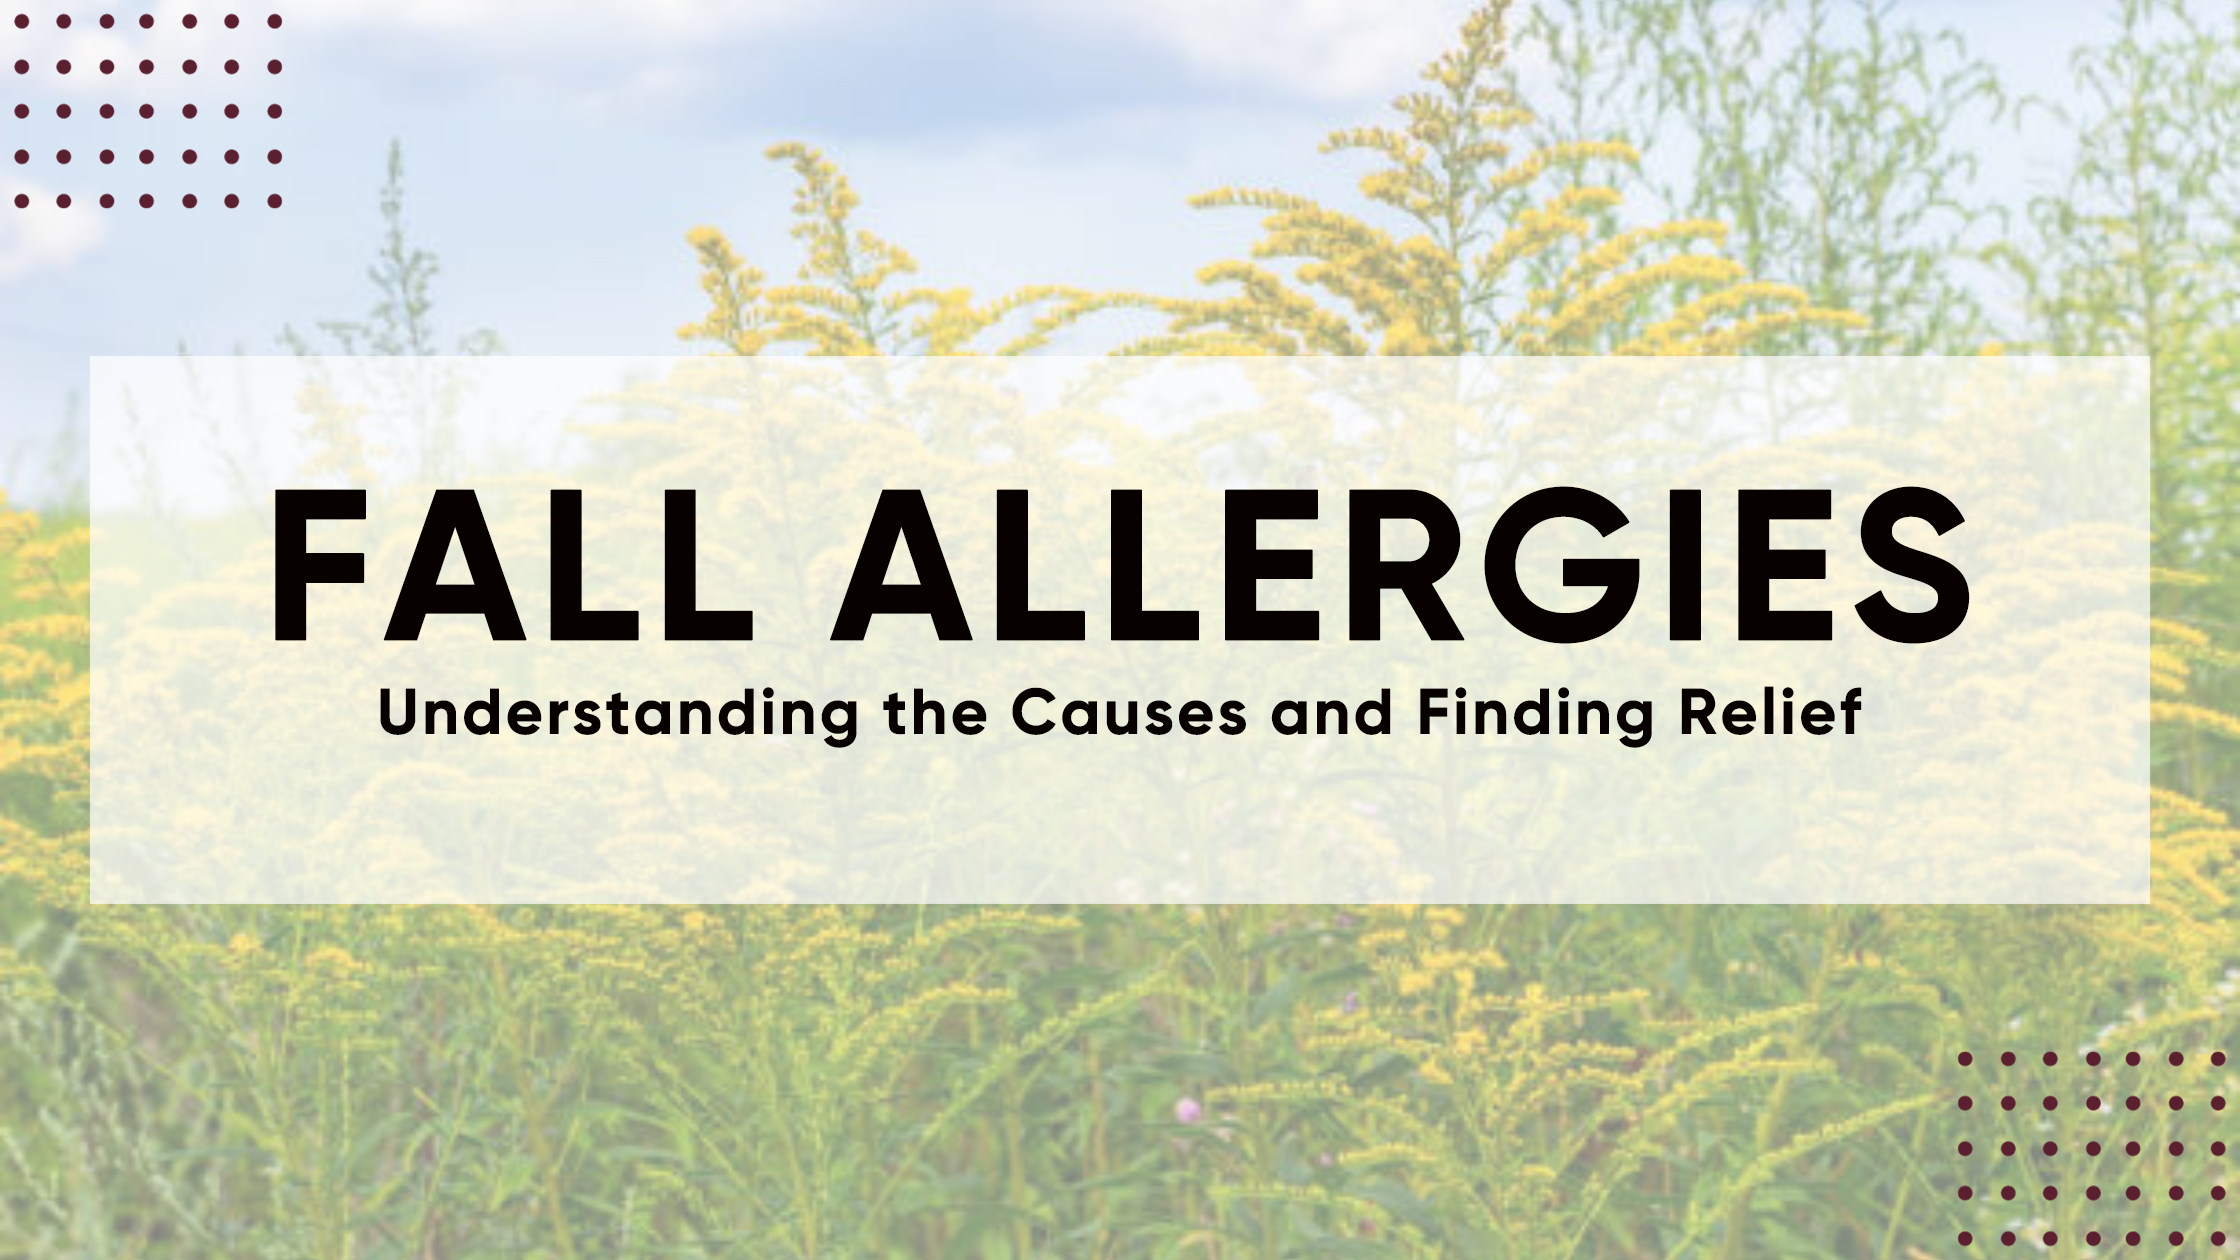 Fall Allergies: Understanding the Causes and Finding Relief